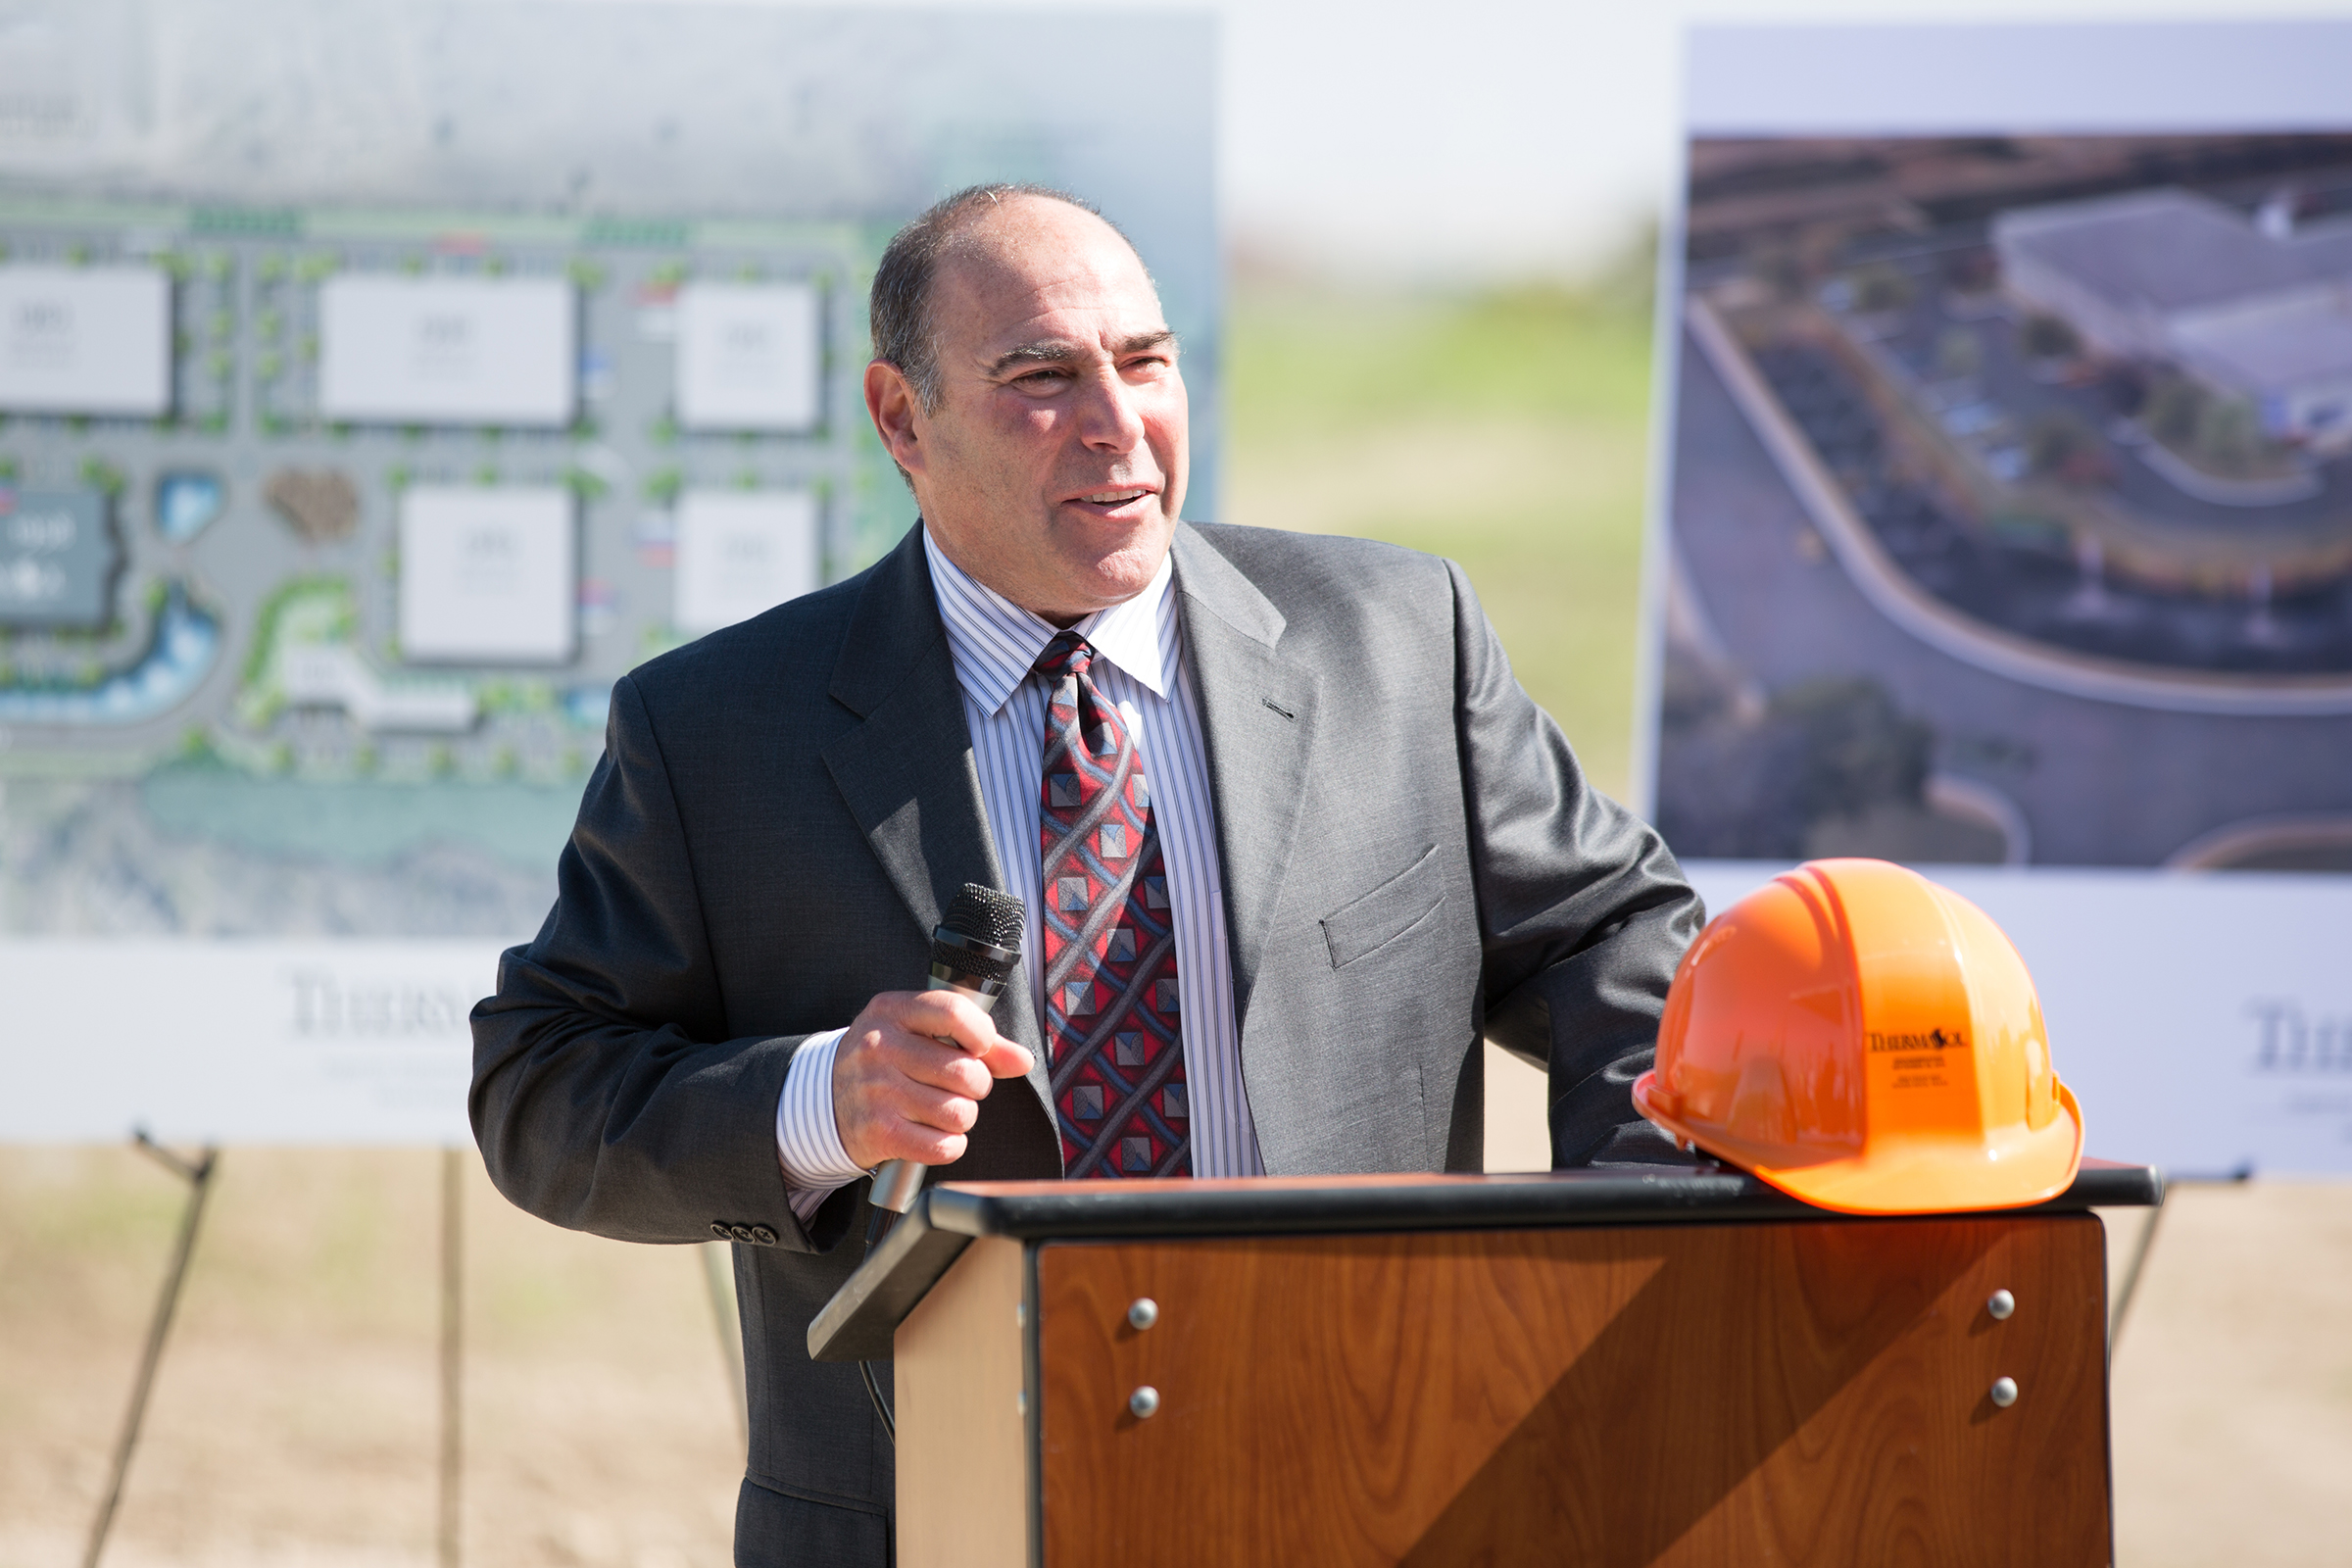 ThermaSol’s CEO Mitch Altman addresses the attendees during ground breaking ceremony.